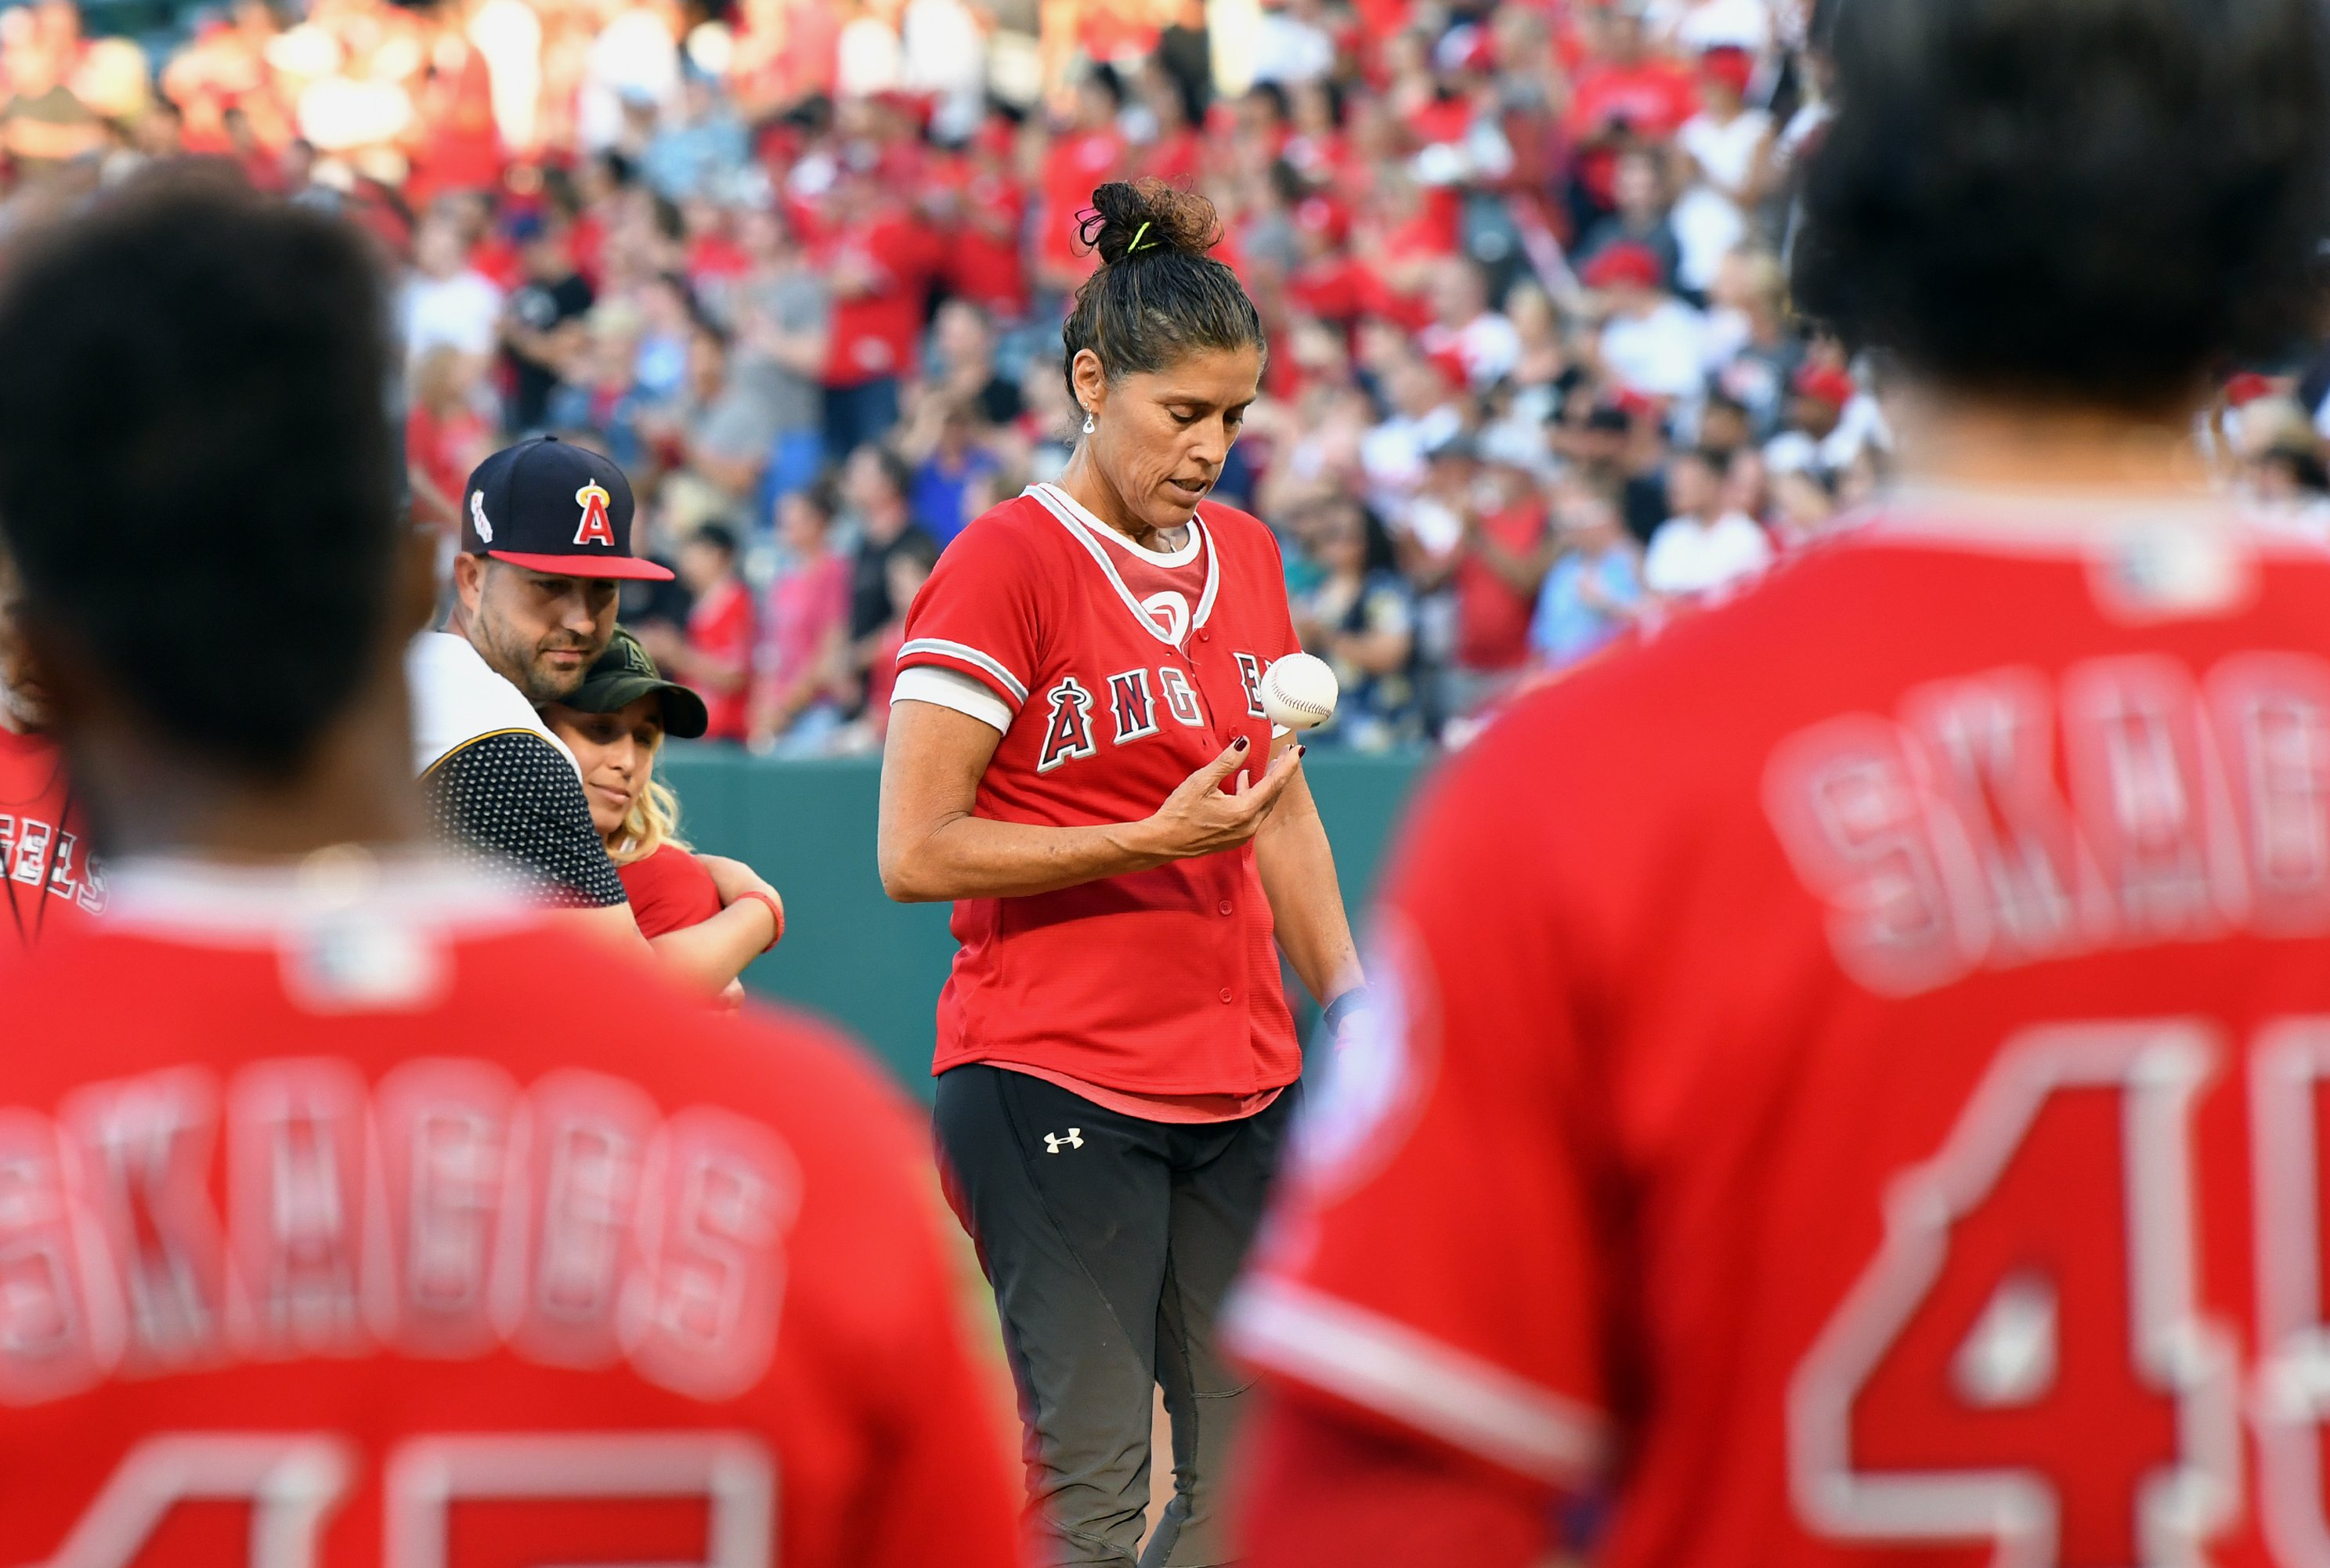 Angels await return home after death of Tyler Skaggs